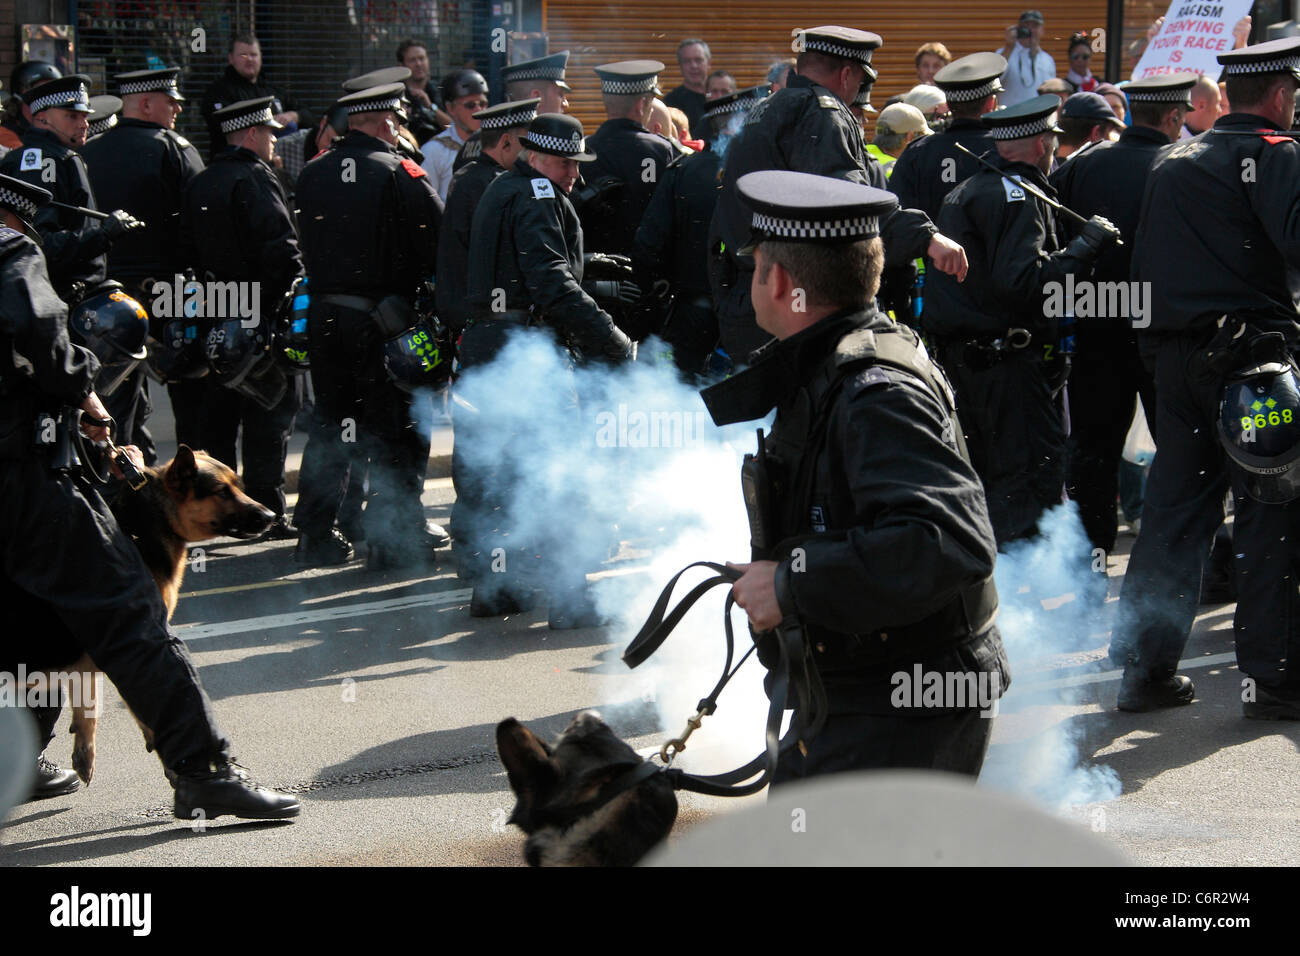 Thunder flash explodes near a police dog during a demonstration by the EDL in London Stock Photo